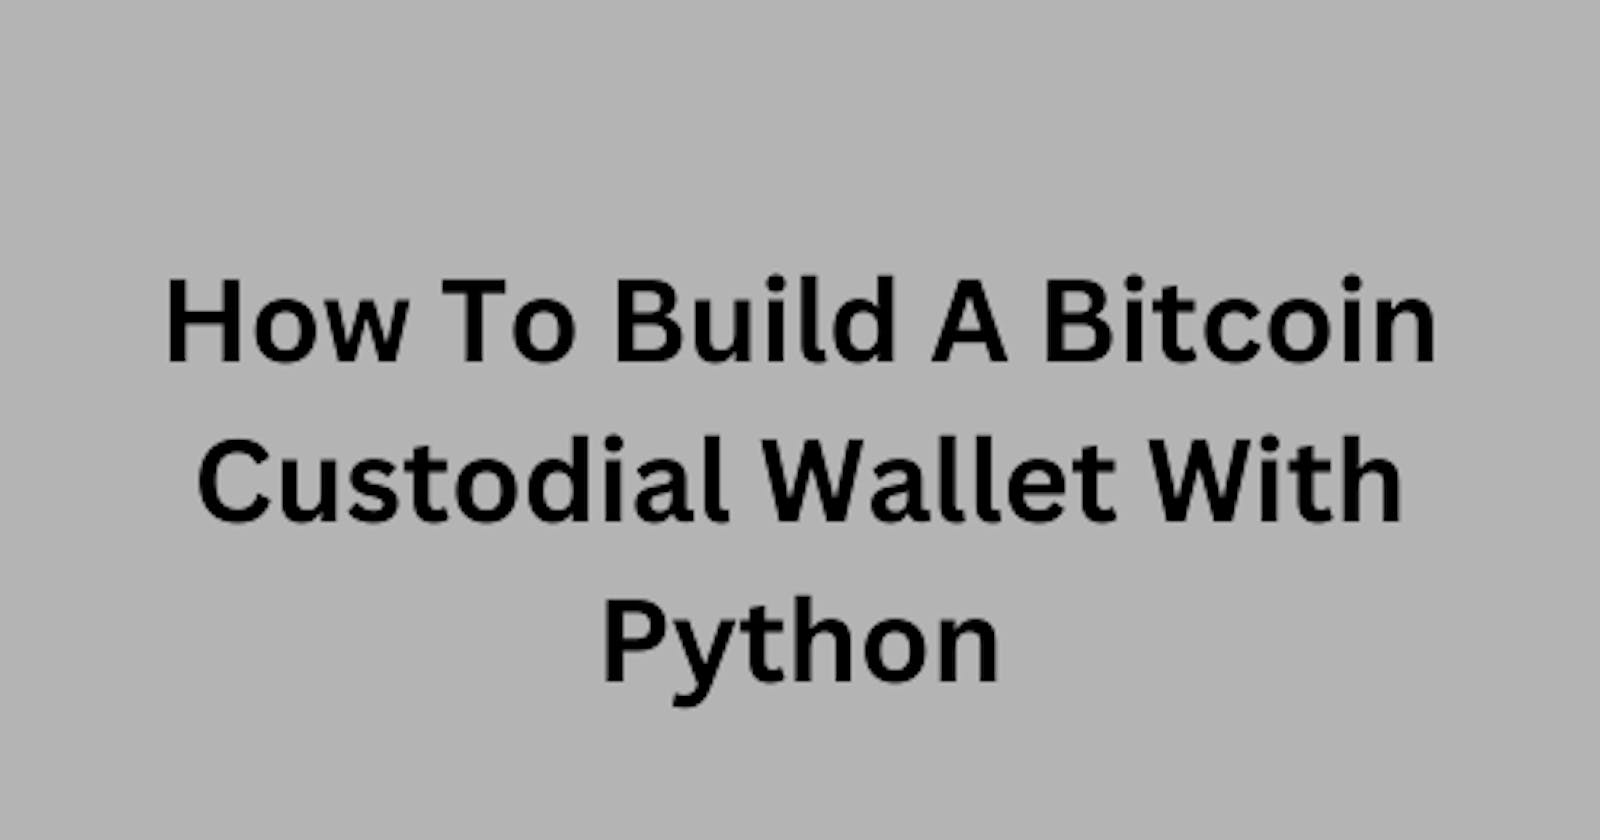 How To Build A Bitcoin Custodial Wallet with Python